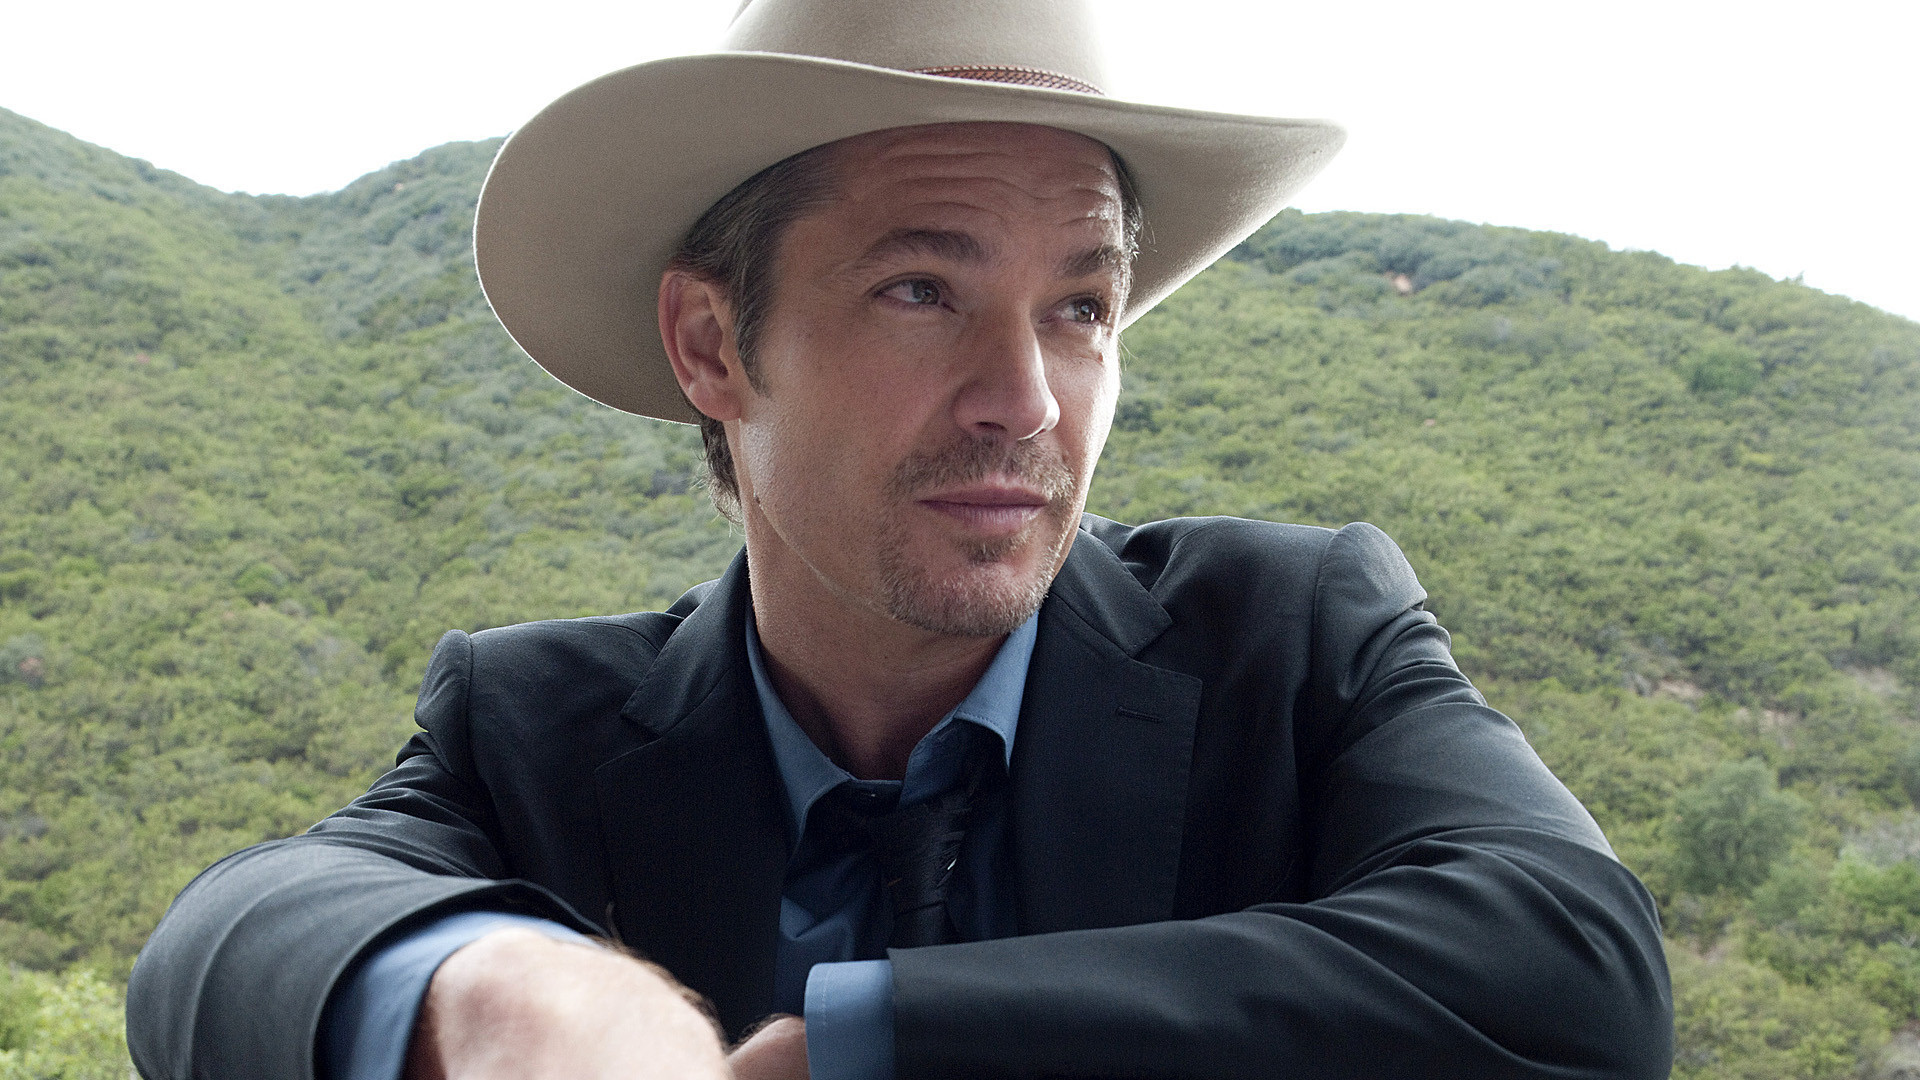 Tv Show - Justified S2 Ep 11 , HD Wallpaper & Backgrounds